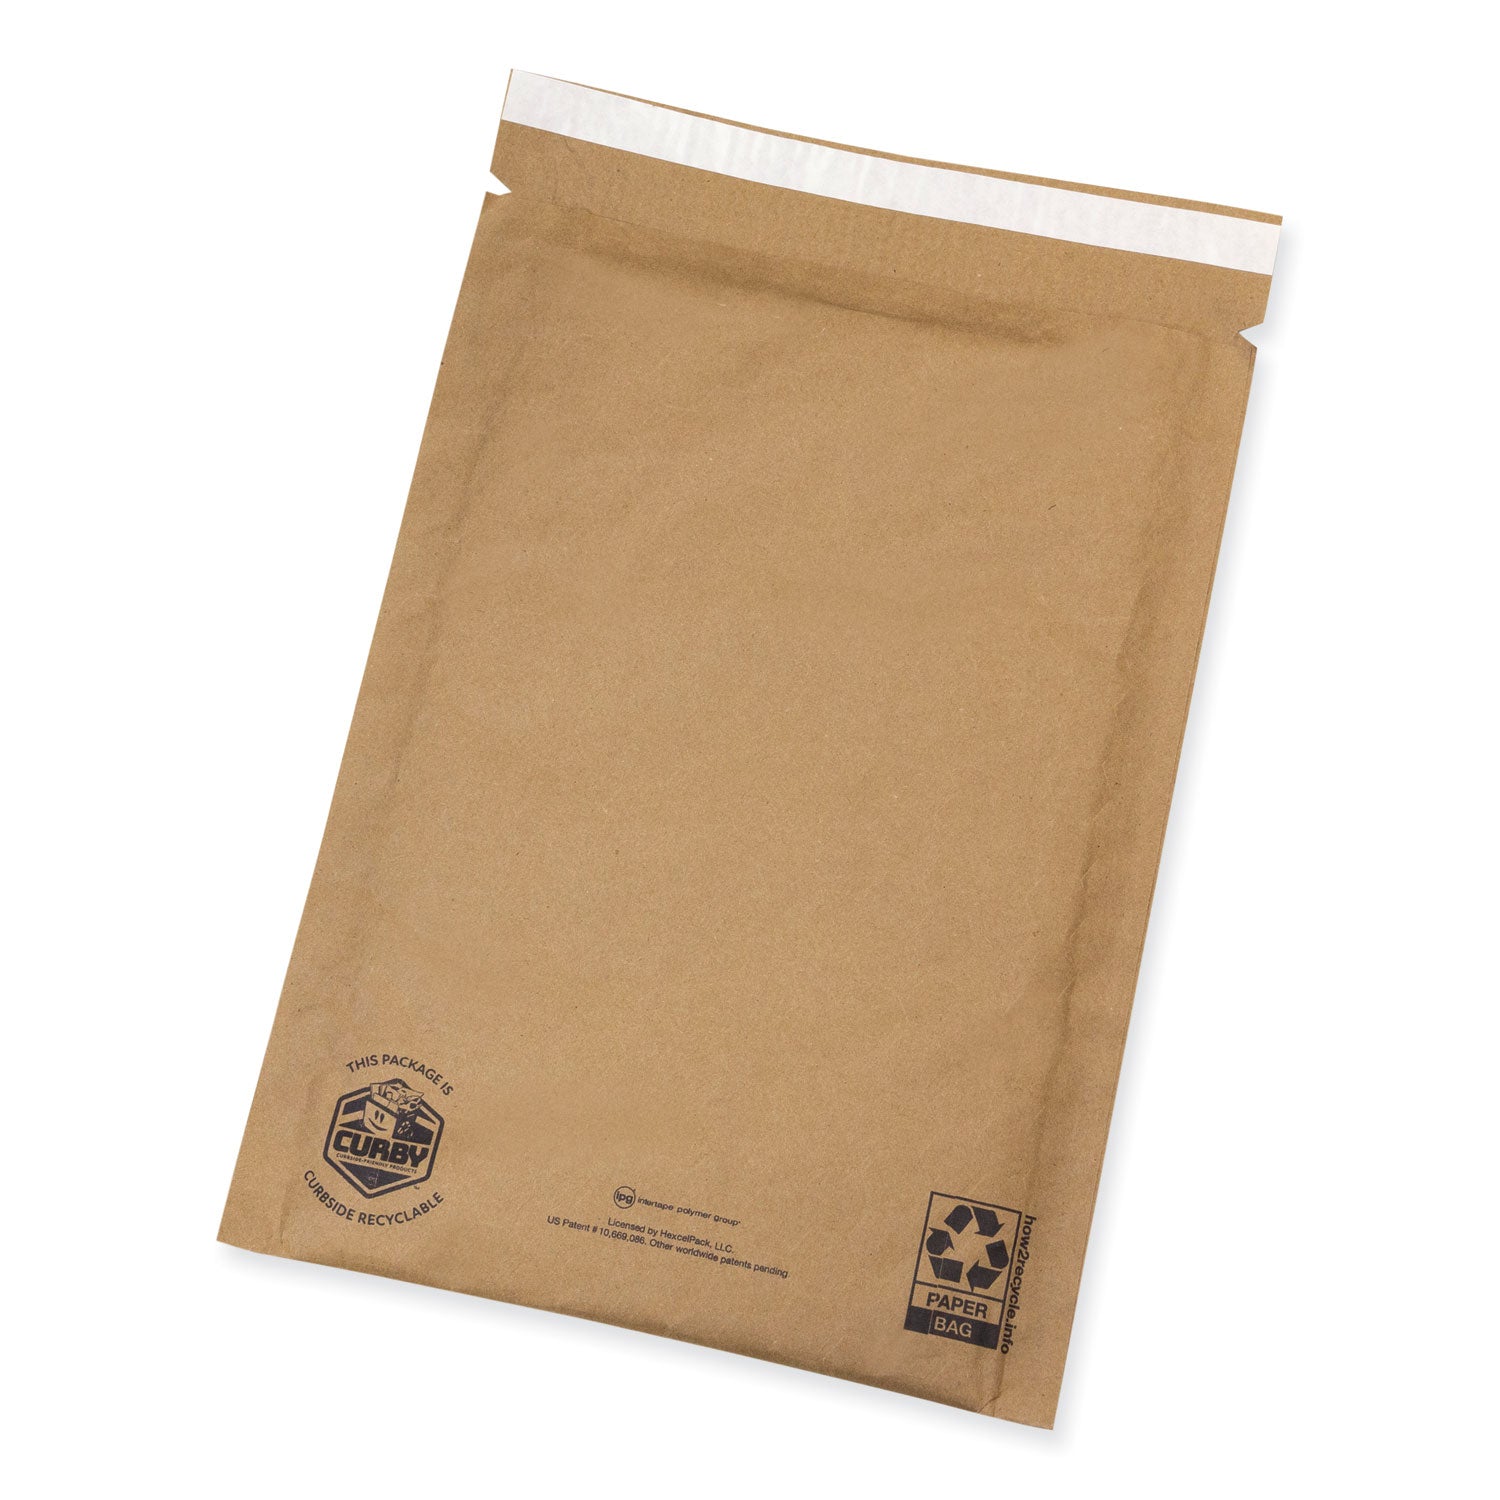 curby-mailer-self-sealing-recyclable-mailer-paper-padding-self-adhesive-#5-1138-x-155-30-carton_ipgcbml5c - 1